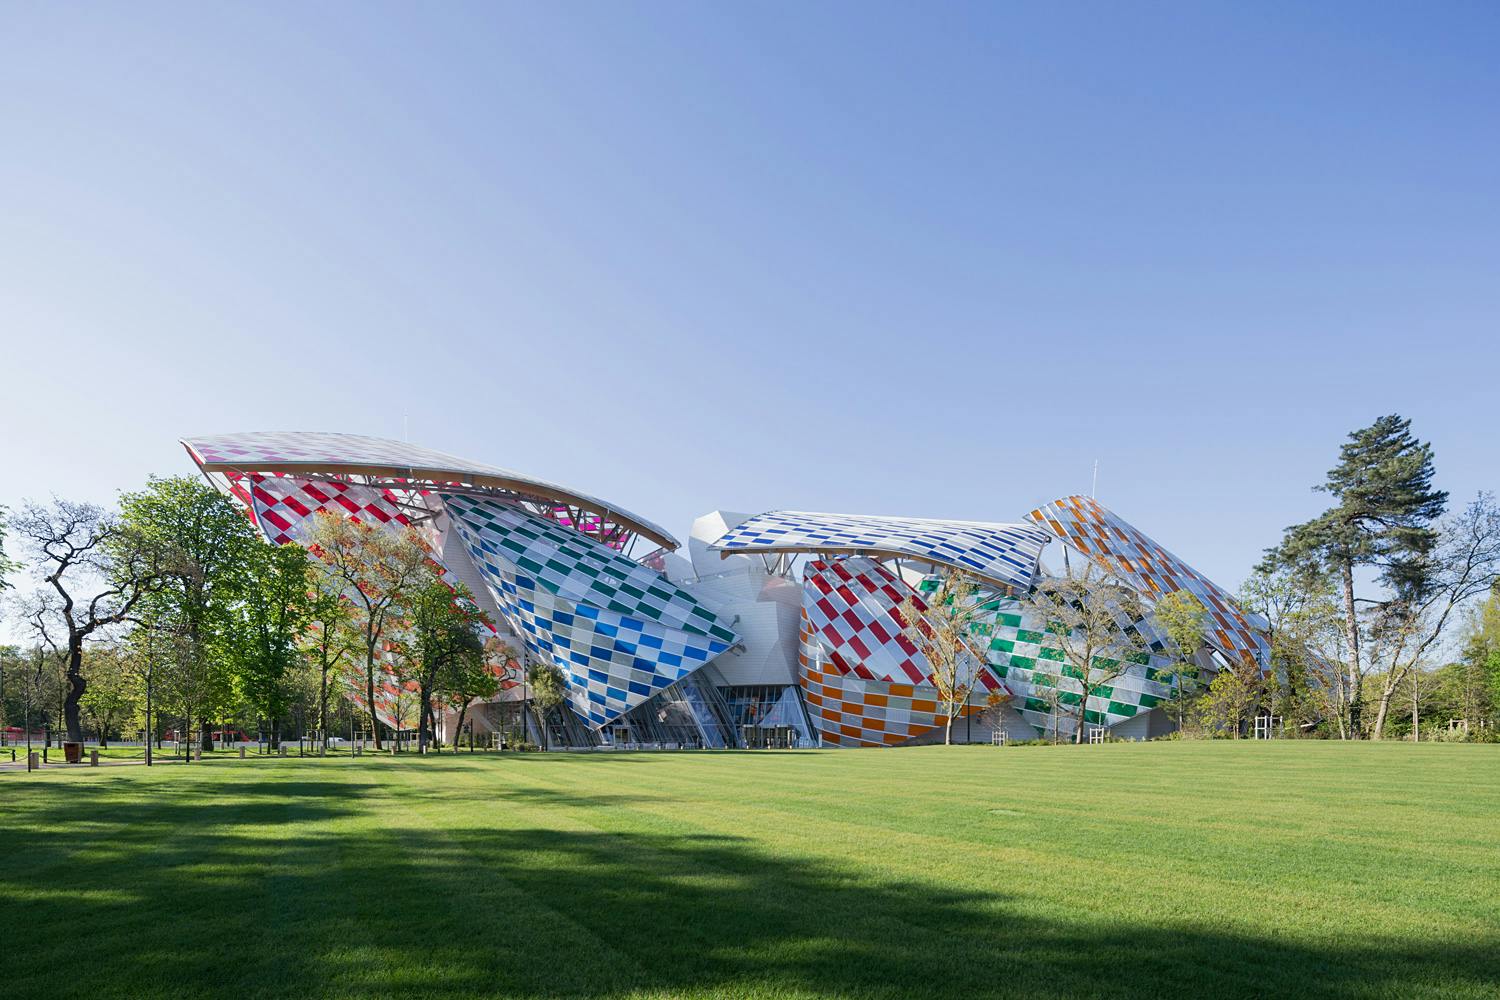 Fugues in Color” at the Fondation Louis Vuitton